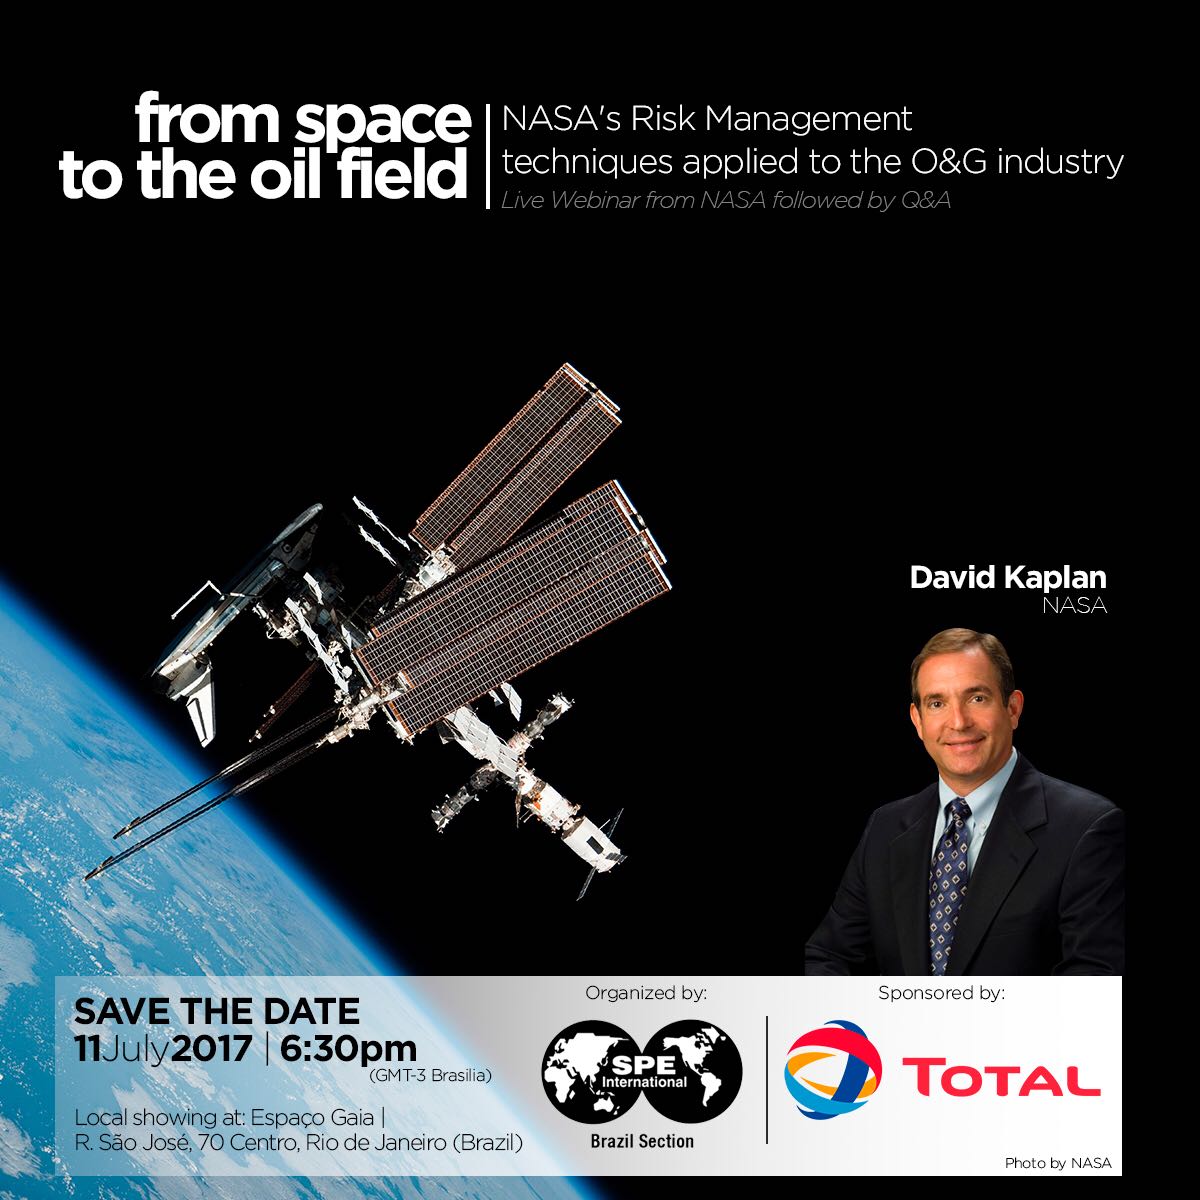 Live Webinar: From space to the oil field – NASA’s Risk Management techniques applied to O&G industry